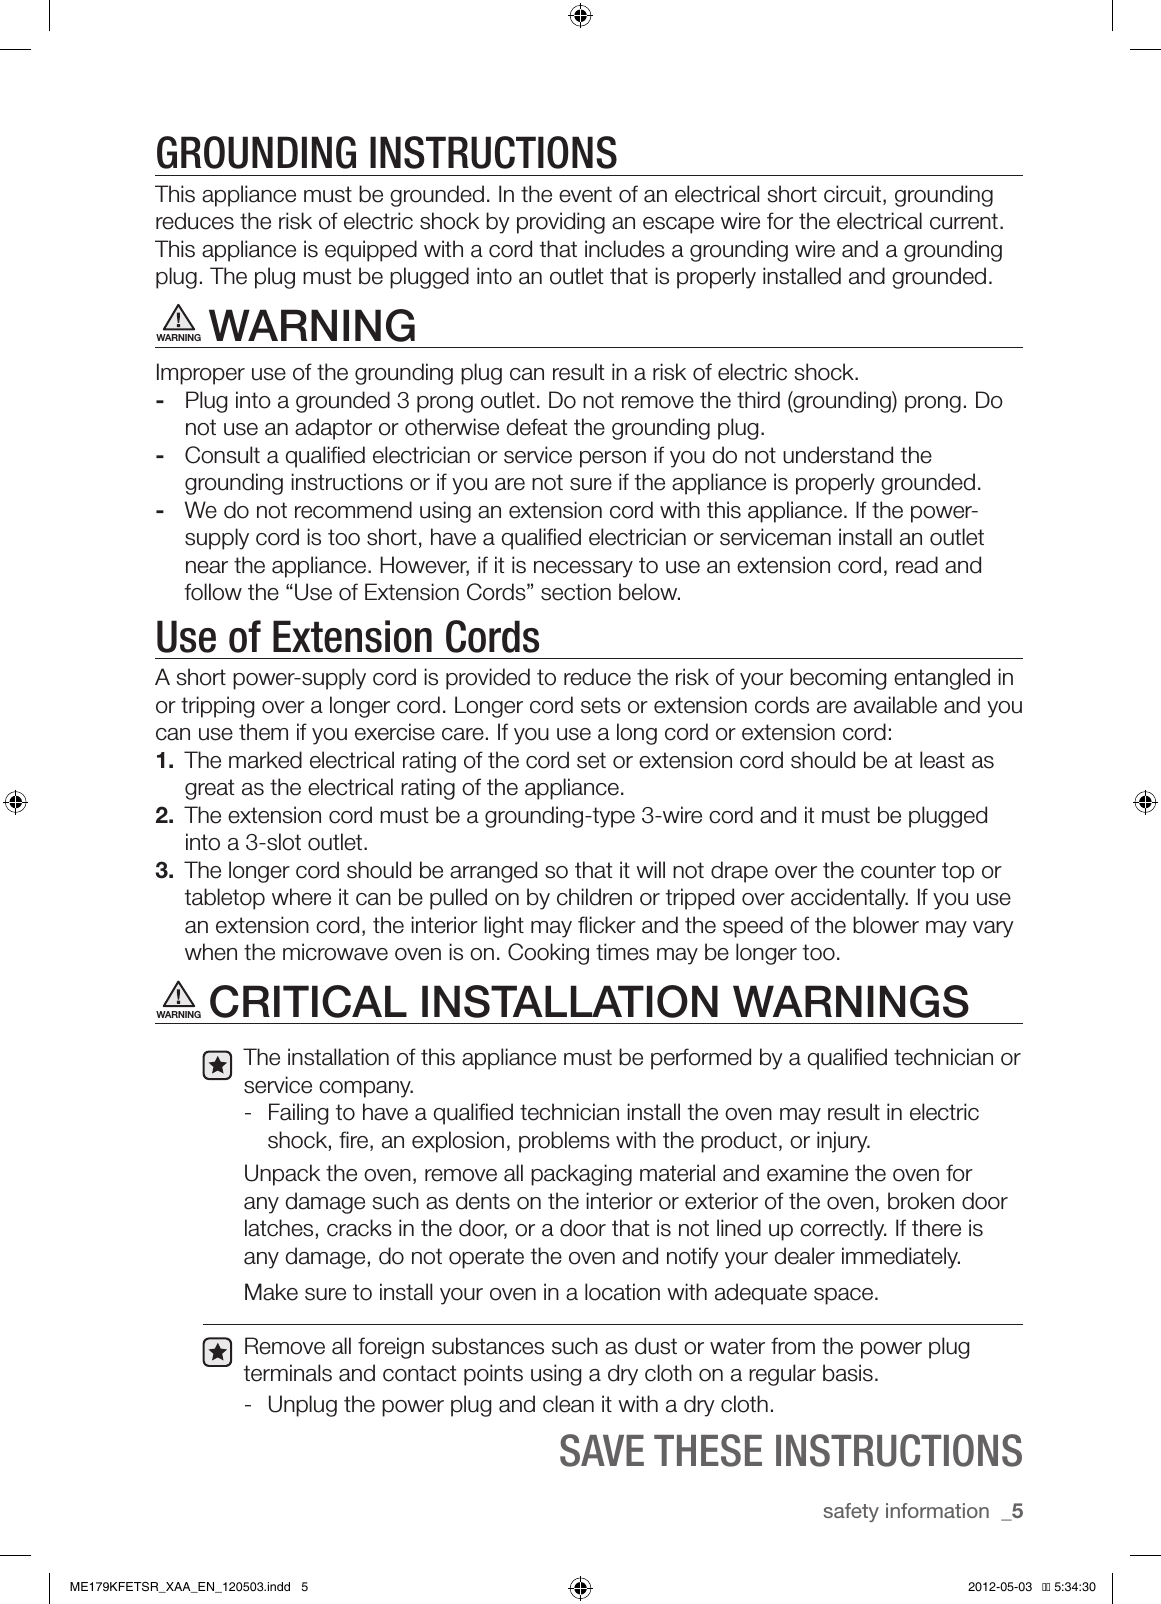 safety information  _5GROUNDING INSTRUCTIONSThis appliance must be grounded. In the event of an electrical short circuit, grounding reduces the risk of electric shock by providing an escape wire for the electrical current. This appliance is equipped with a cord that includes a grounding wire and a grounding plug. The plug must be plugged into an outlet that is properly installed and grounded.WARNINGImproper use of the grounding plug can result in a risk of electric shock. -  Plug into a grounded 3 prong outlet. Do not remove the third (grounding) prong. Do not use an adaptor or otherwise defeat the grounding plug.-  Consult a qualiﬁed electrician or service person if you do not understand the grounding instructions or if you are not sure if the appliance is properly grounded.-  We do not recommend using an extension cord with this appliance. If the power-supply cord is too short, have a qualiﬁed electrician or serviceman install an outlet near the appliance. However, if it is necessary to use an extension cord, read and follow the “Use of Extension Cords” section below.Use of Extension CordsA short power-supply cord is provided to reduce the risk of your becoming entangled in or tripping over a longer cord. Longer cord sets or extension cords are available and you can use them if you exercise care. If you use a long cord or extension cord:1.  The marked electrical rating of the cord set or extension cord should be at least as great as the electrical rating of the appliance.2.  The extension cord must be a grounding-type 3-wire cord and it must be plugged into a 3-slot outlet.3.  The longer cord should be arranged so that it will not drape over the counter top or tabletop where it can be pulled on by children or tripped over accidentally. If you use an extension cord, the interior light may ﬂicker and the speed of the blower may vary when the microwave oven is on. Cooking times may be longer too.CRITICAL INSTALLATION WARNINGSThe installation of this appliance must be performed by a qualiﬁed technician or service company.-  Failing to have a qualiﬁed technician install the oven may result in electric shock, ﬁre, an explosion, problems with the product, or injury.Unpack the oven, remove all packaging material and examine the oven for any damage such as dents on the interior or exterior of the oven, broken door latches, cracks in the door, or a door that is not lined up correctly. If there is any damage, do not operate the oven and notify your dealer immediately. Make sure to install your oven in a location with adequate space. Remove all foreign substances such as dust or water from the power plug terminals and contact points using a dry cloth on a regular basis.-  Unplug the power plug and clean it with a dry cloth.SAVE THESE INSTRUCTIONSWARNINGWARNINGME179KFETSR_XAA_EN_120503.indd   5 2012-05-03   �� 5:34:30